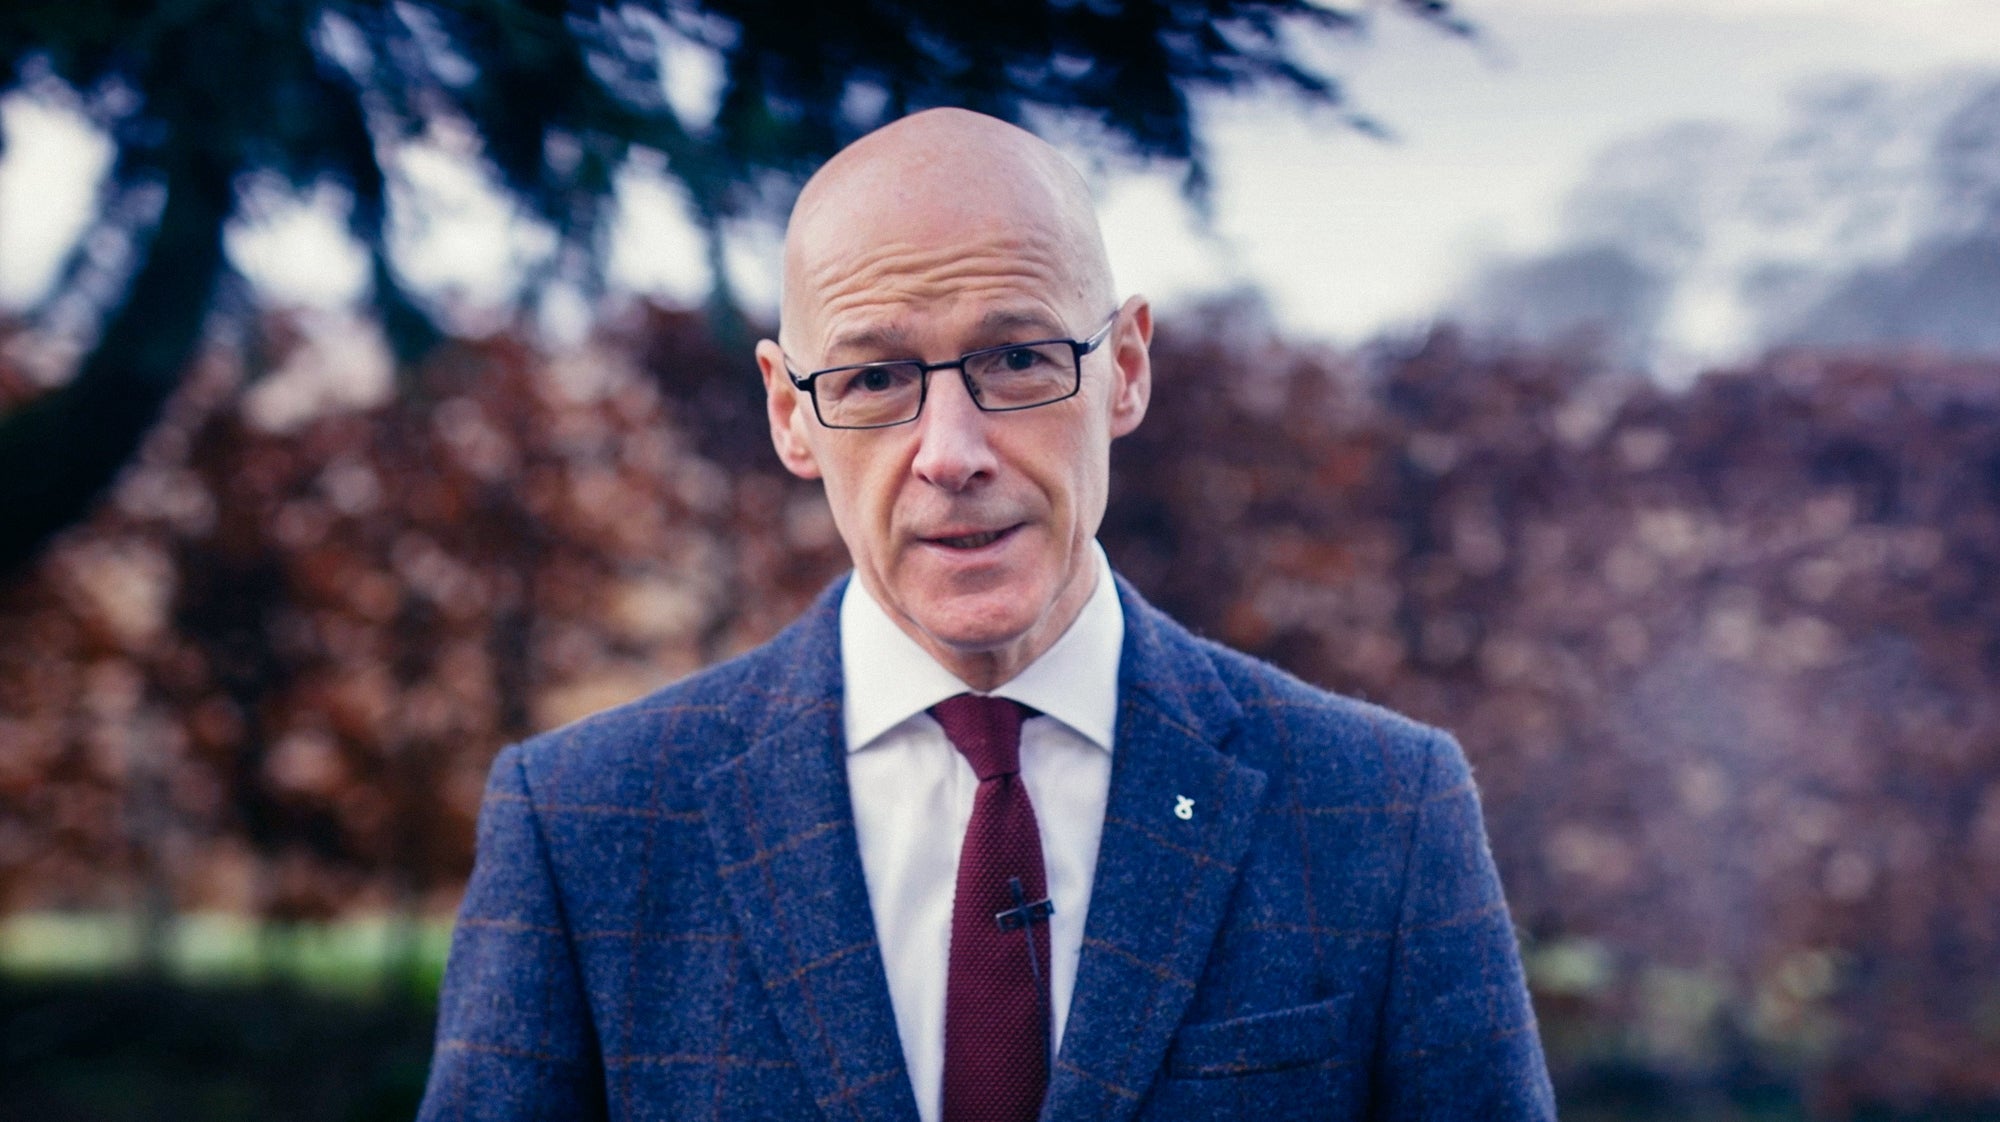 Education secretary John Swinney at his home in Woodside, East Perthshire, speaking at the party’s annual conference on Saturday (28 November)